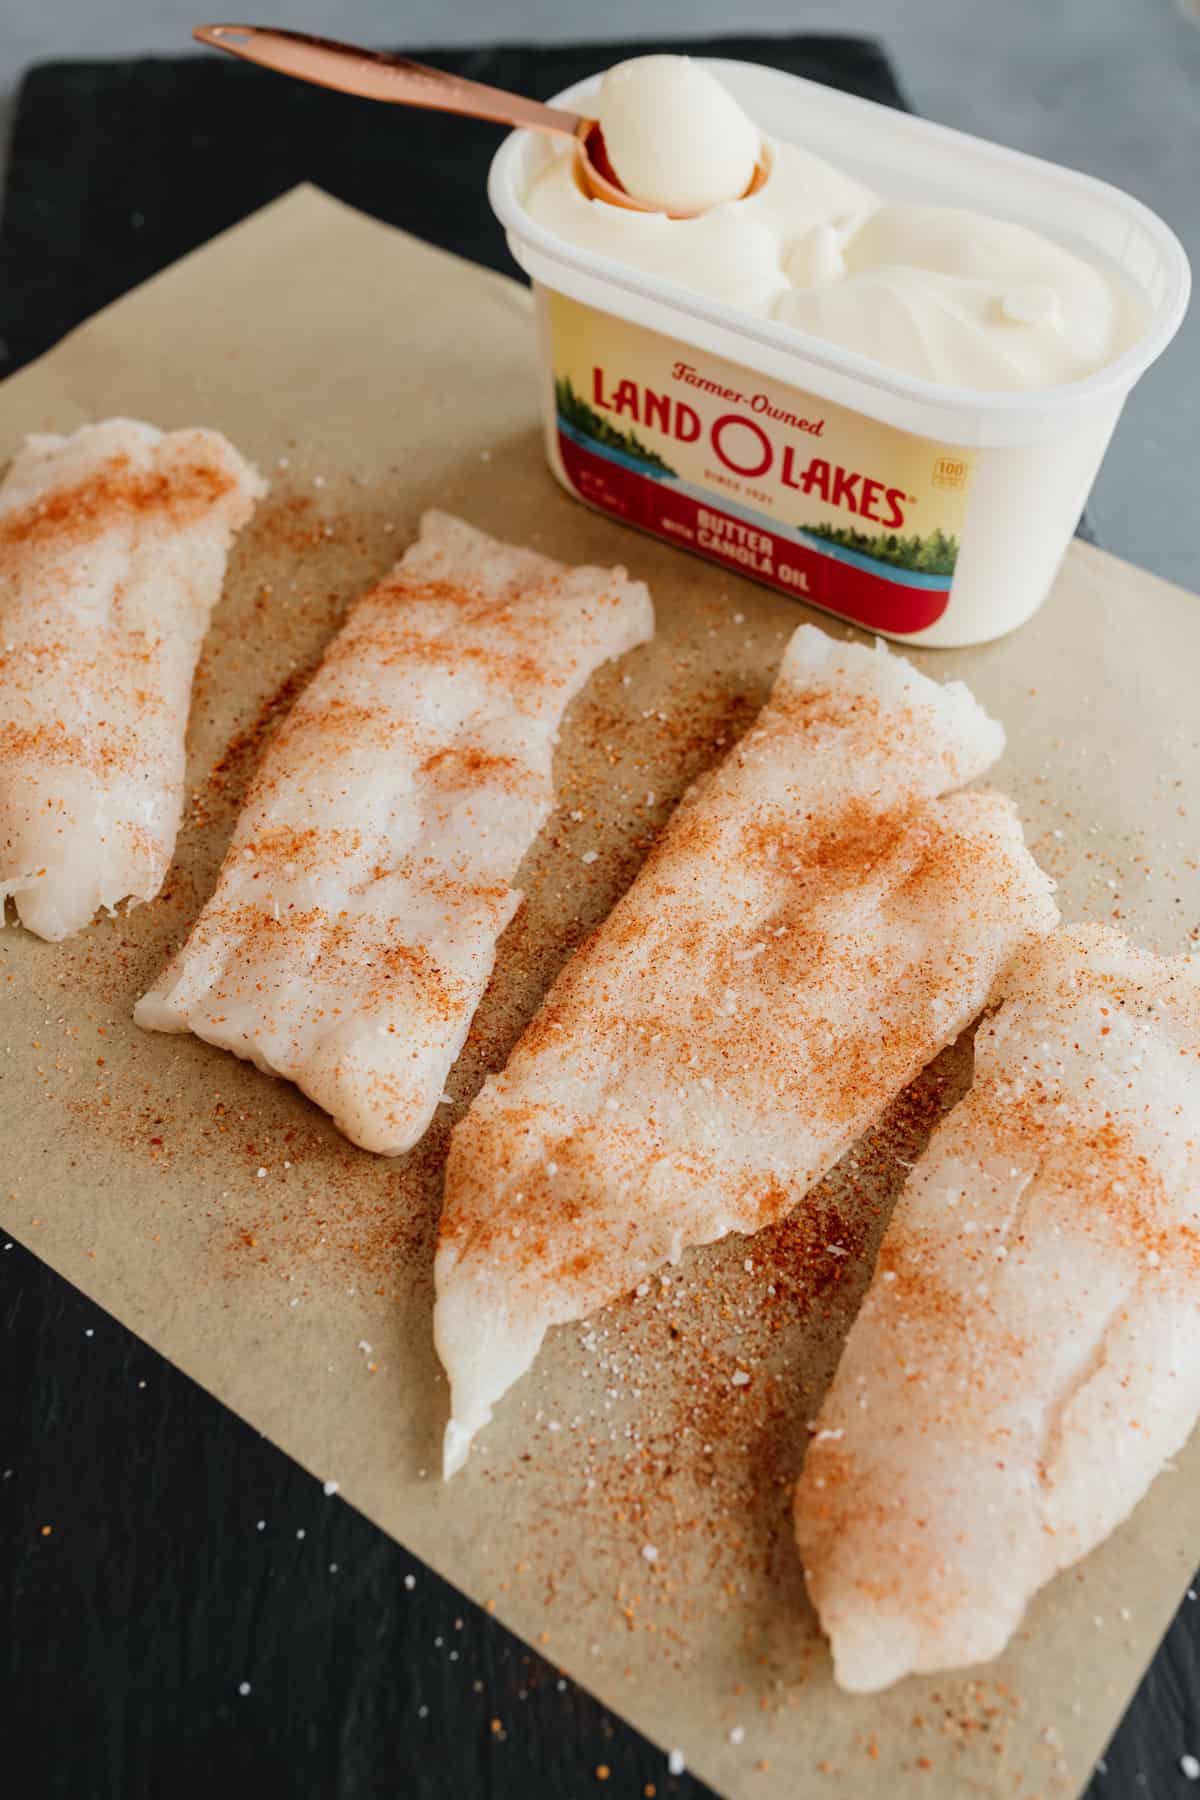 a tub of land o lakes butter and four cod fillets sprinkled with spice on parchment paper